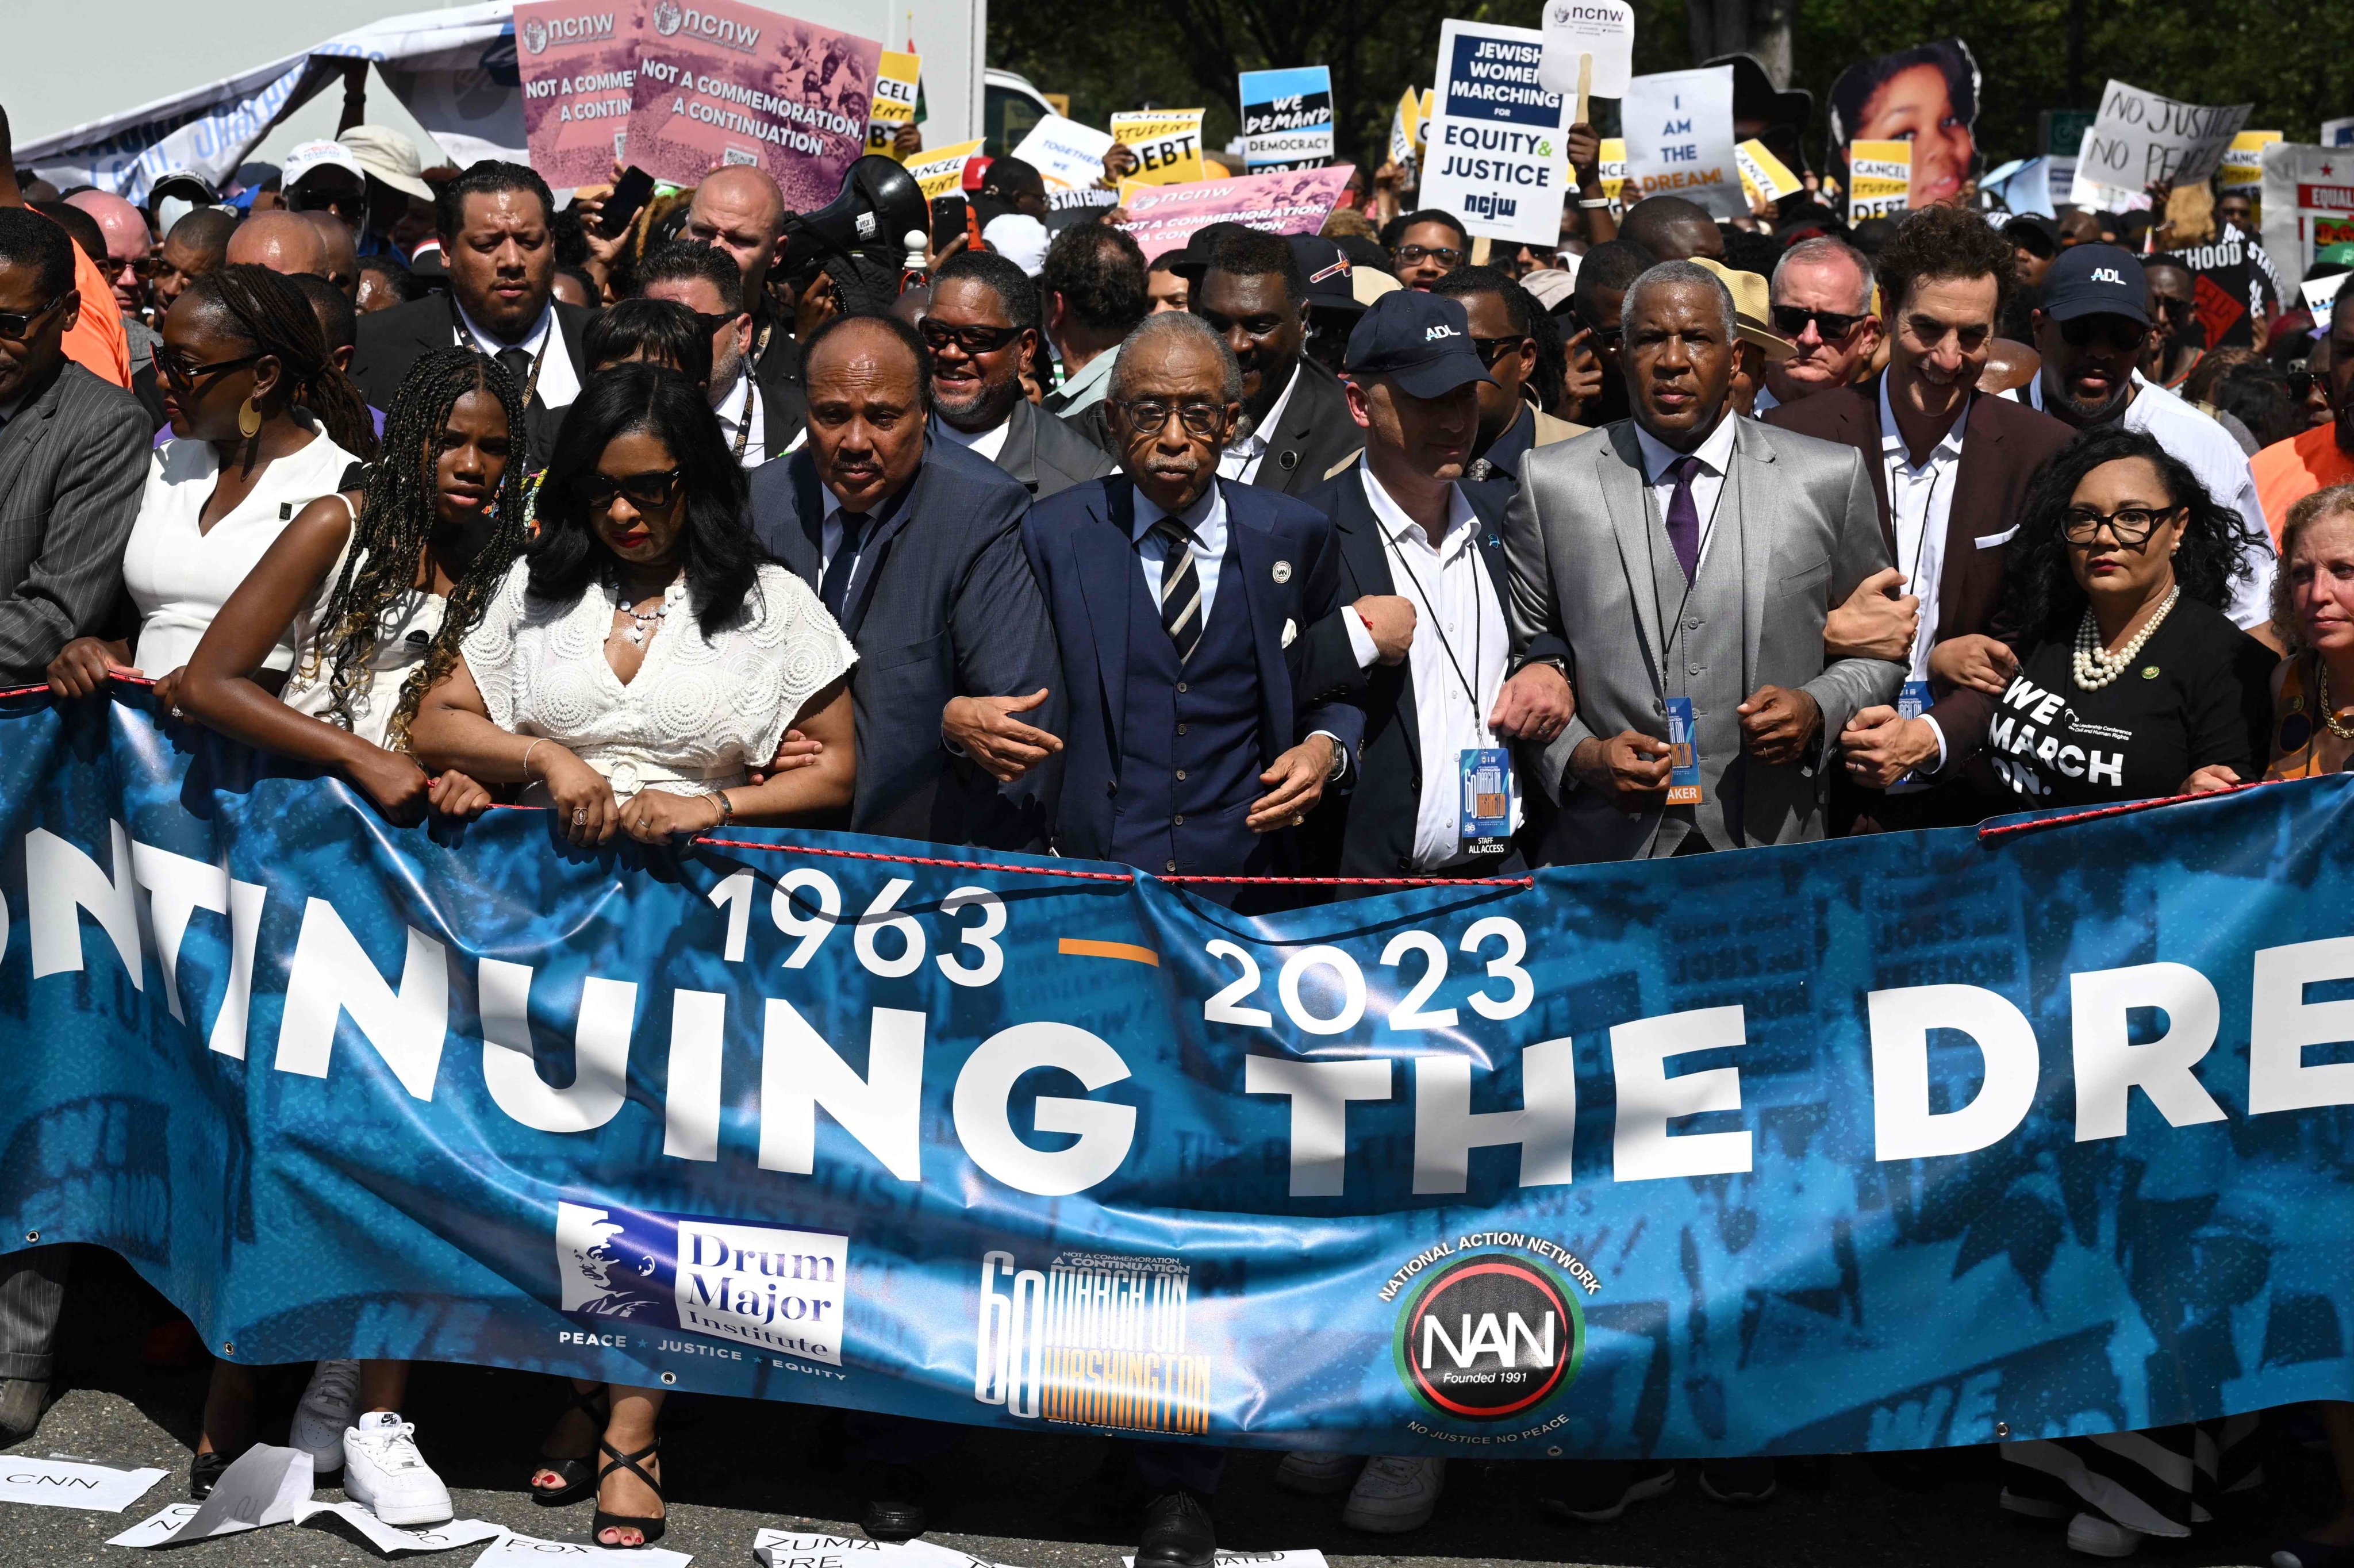 Martin Luther King III, centre left, and the Reverend Al Sharpton, centre right, lead the march on the 60th anniversary of the civil rights March on Washington, in Washington on Saturday. Photo: AFP